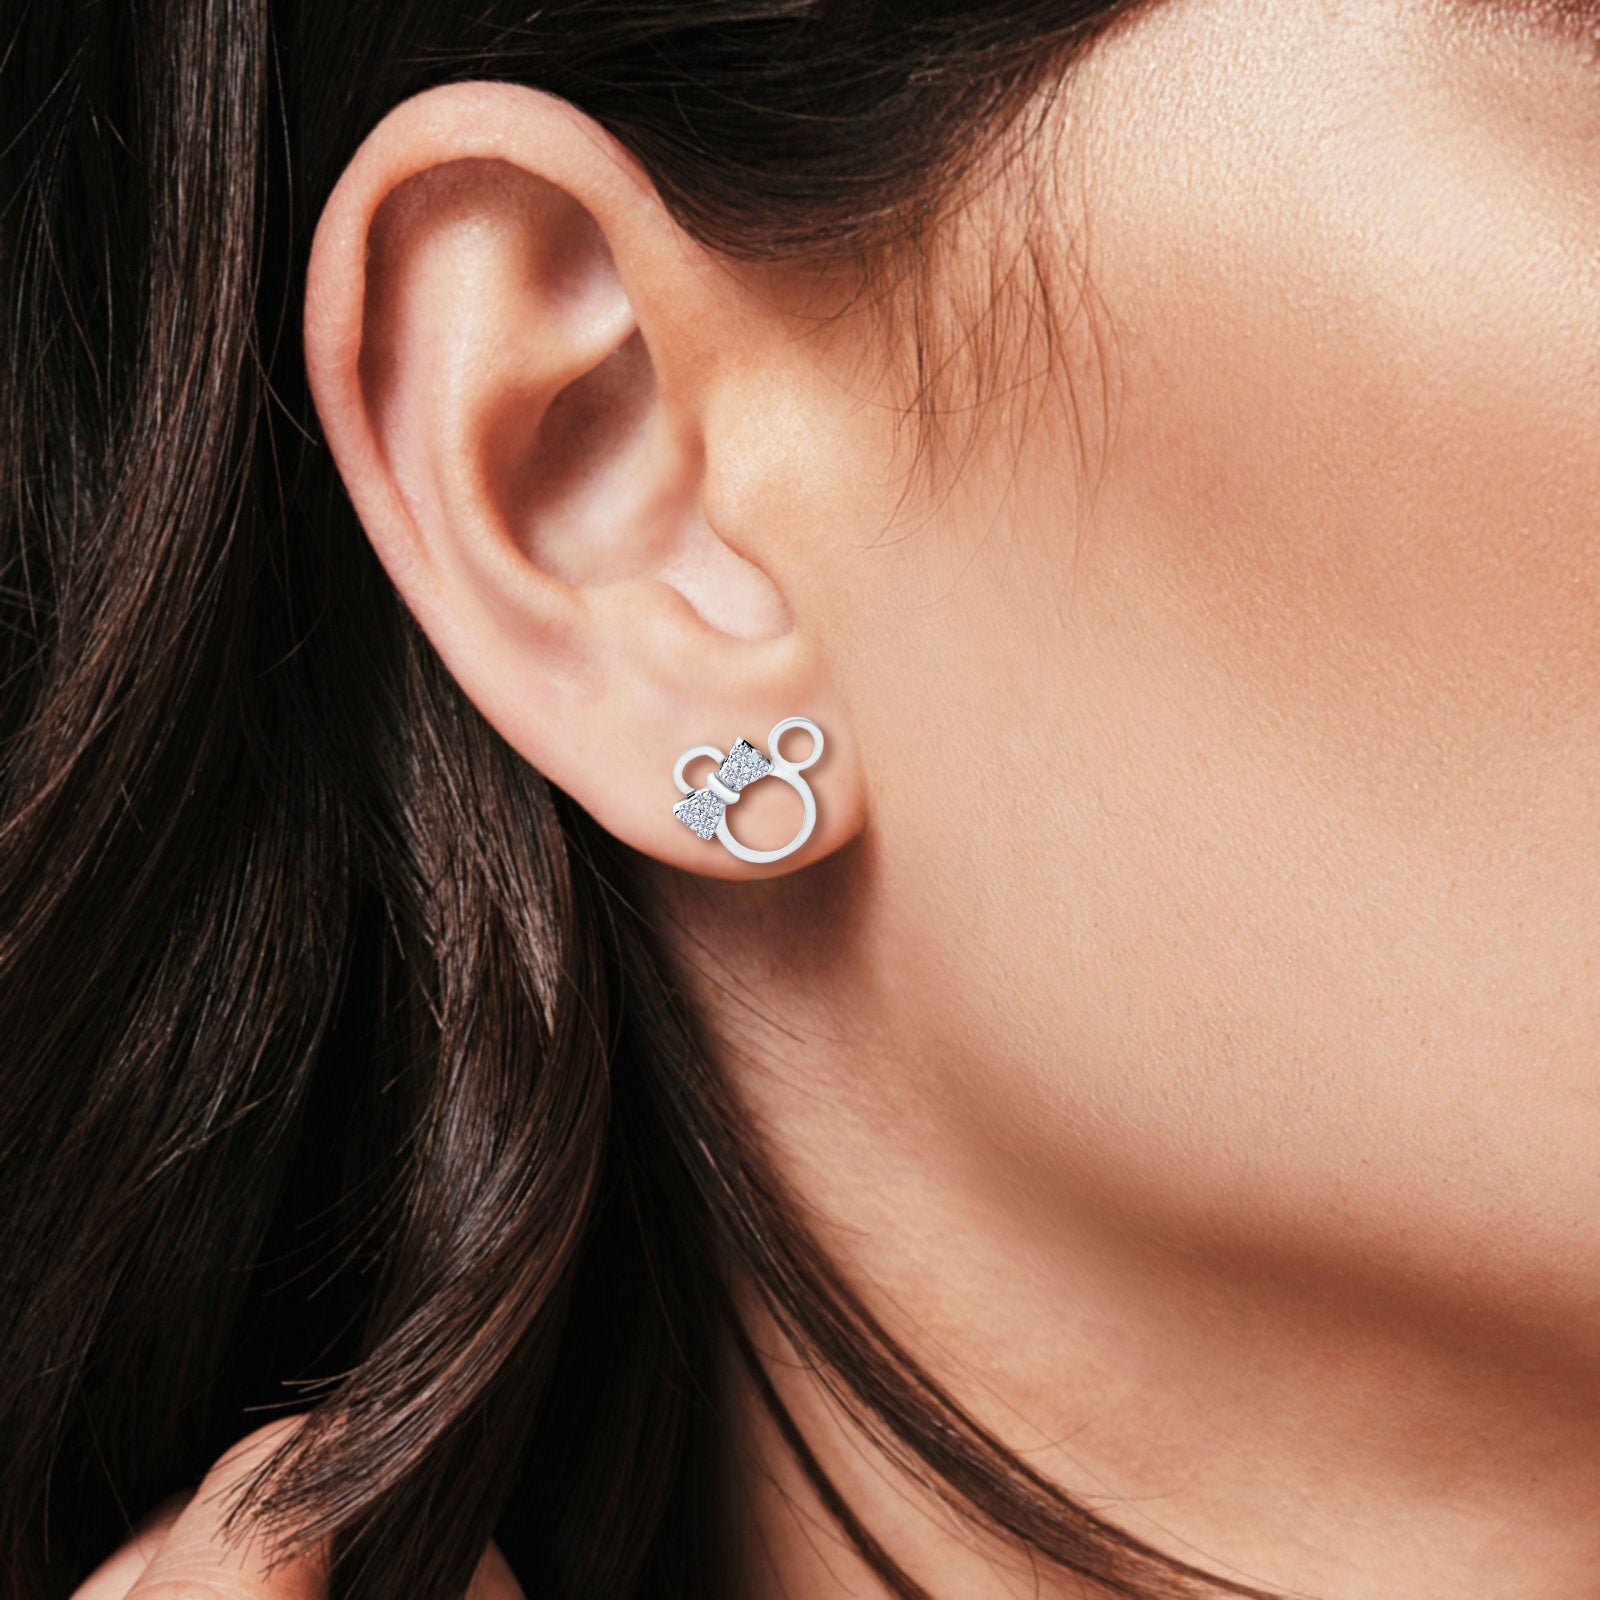 Why Are Diamond Earrings The Best Gift For A Woman?